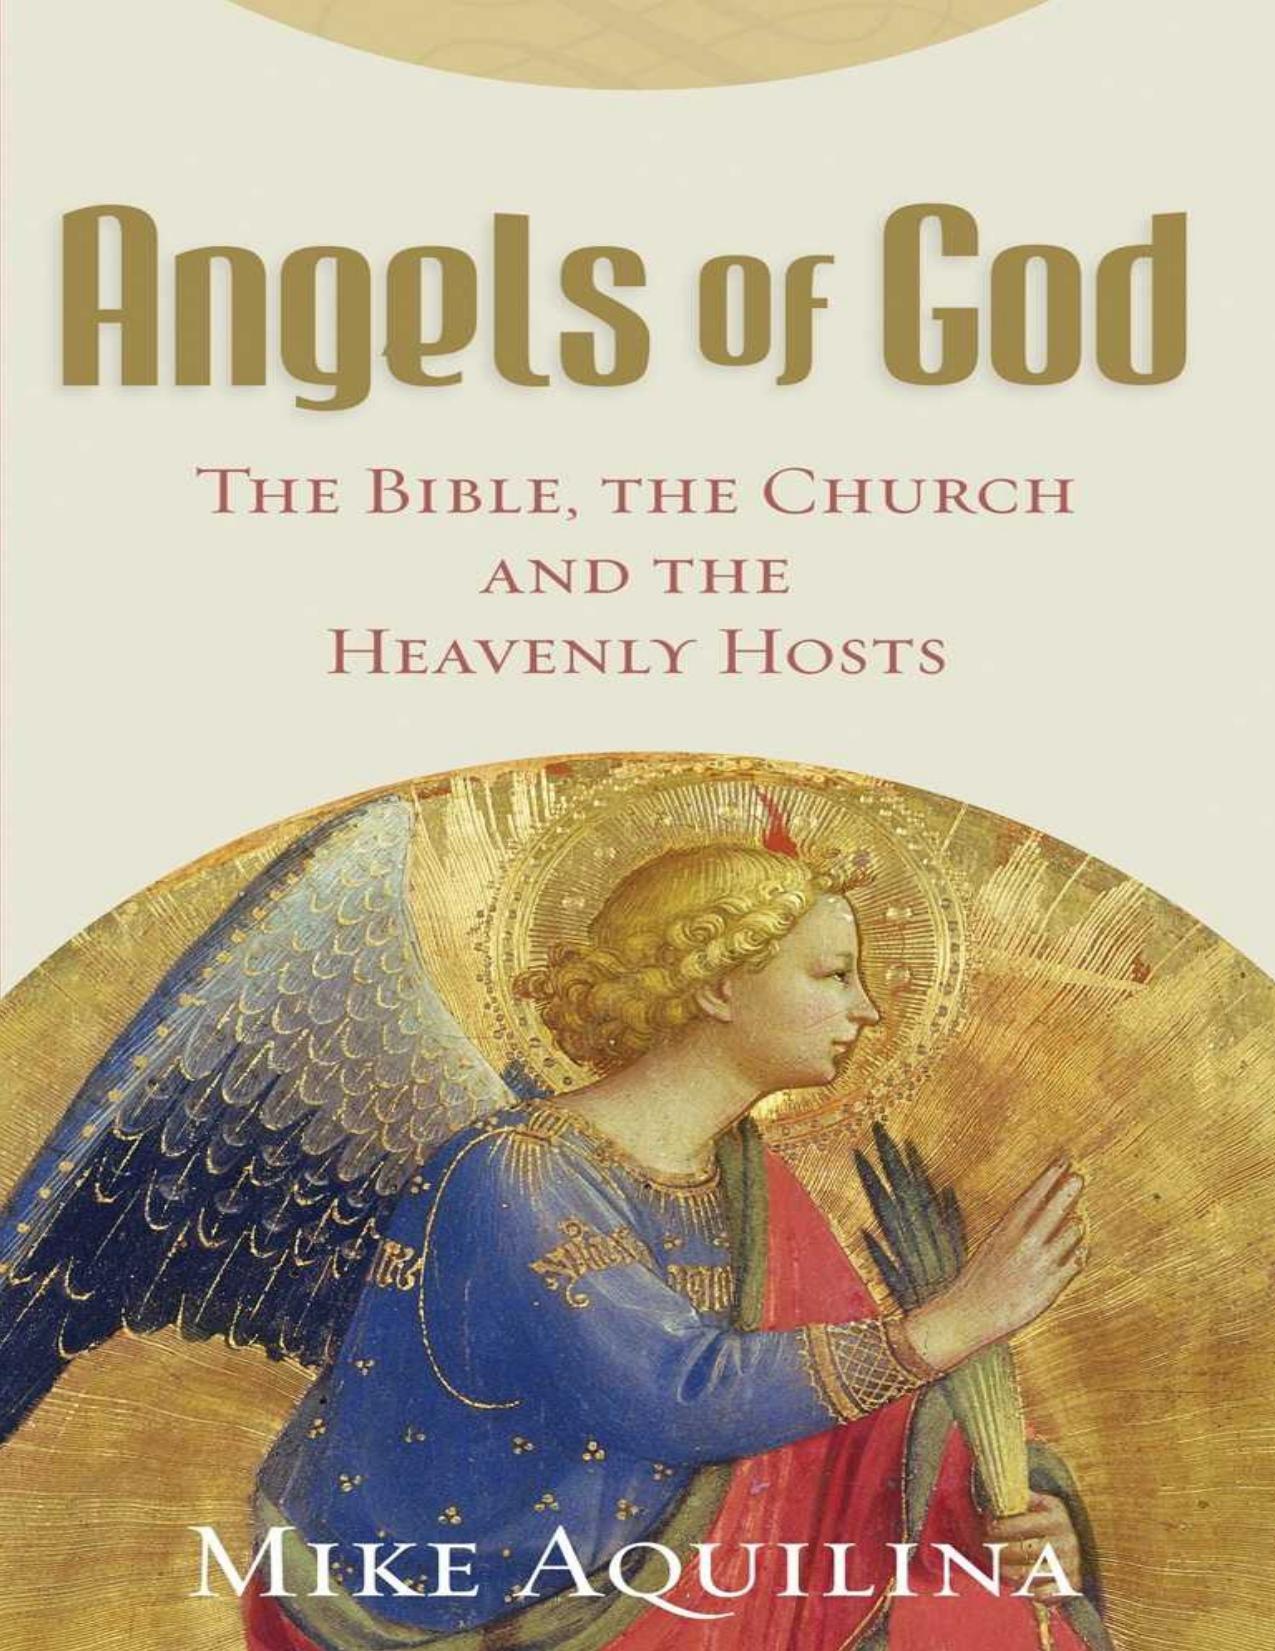 Angels of God: The Bible, the Church and the Heavenly Hosts by Mike Aquilina